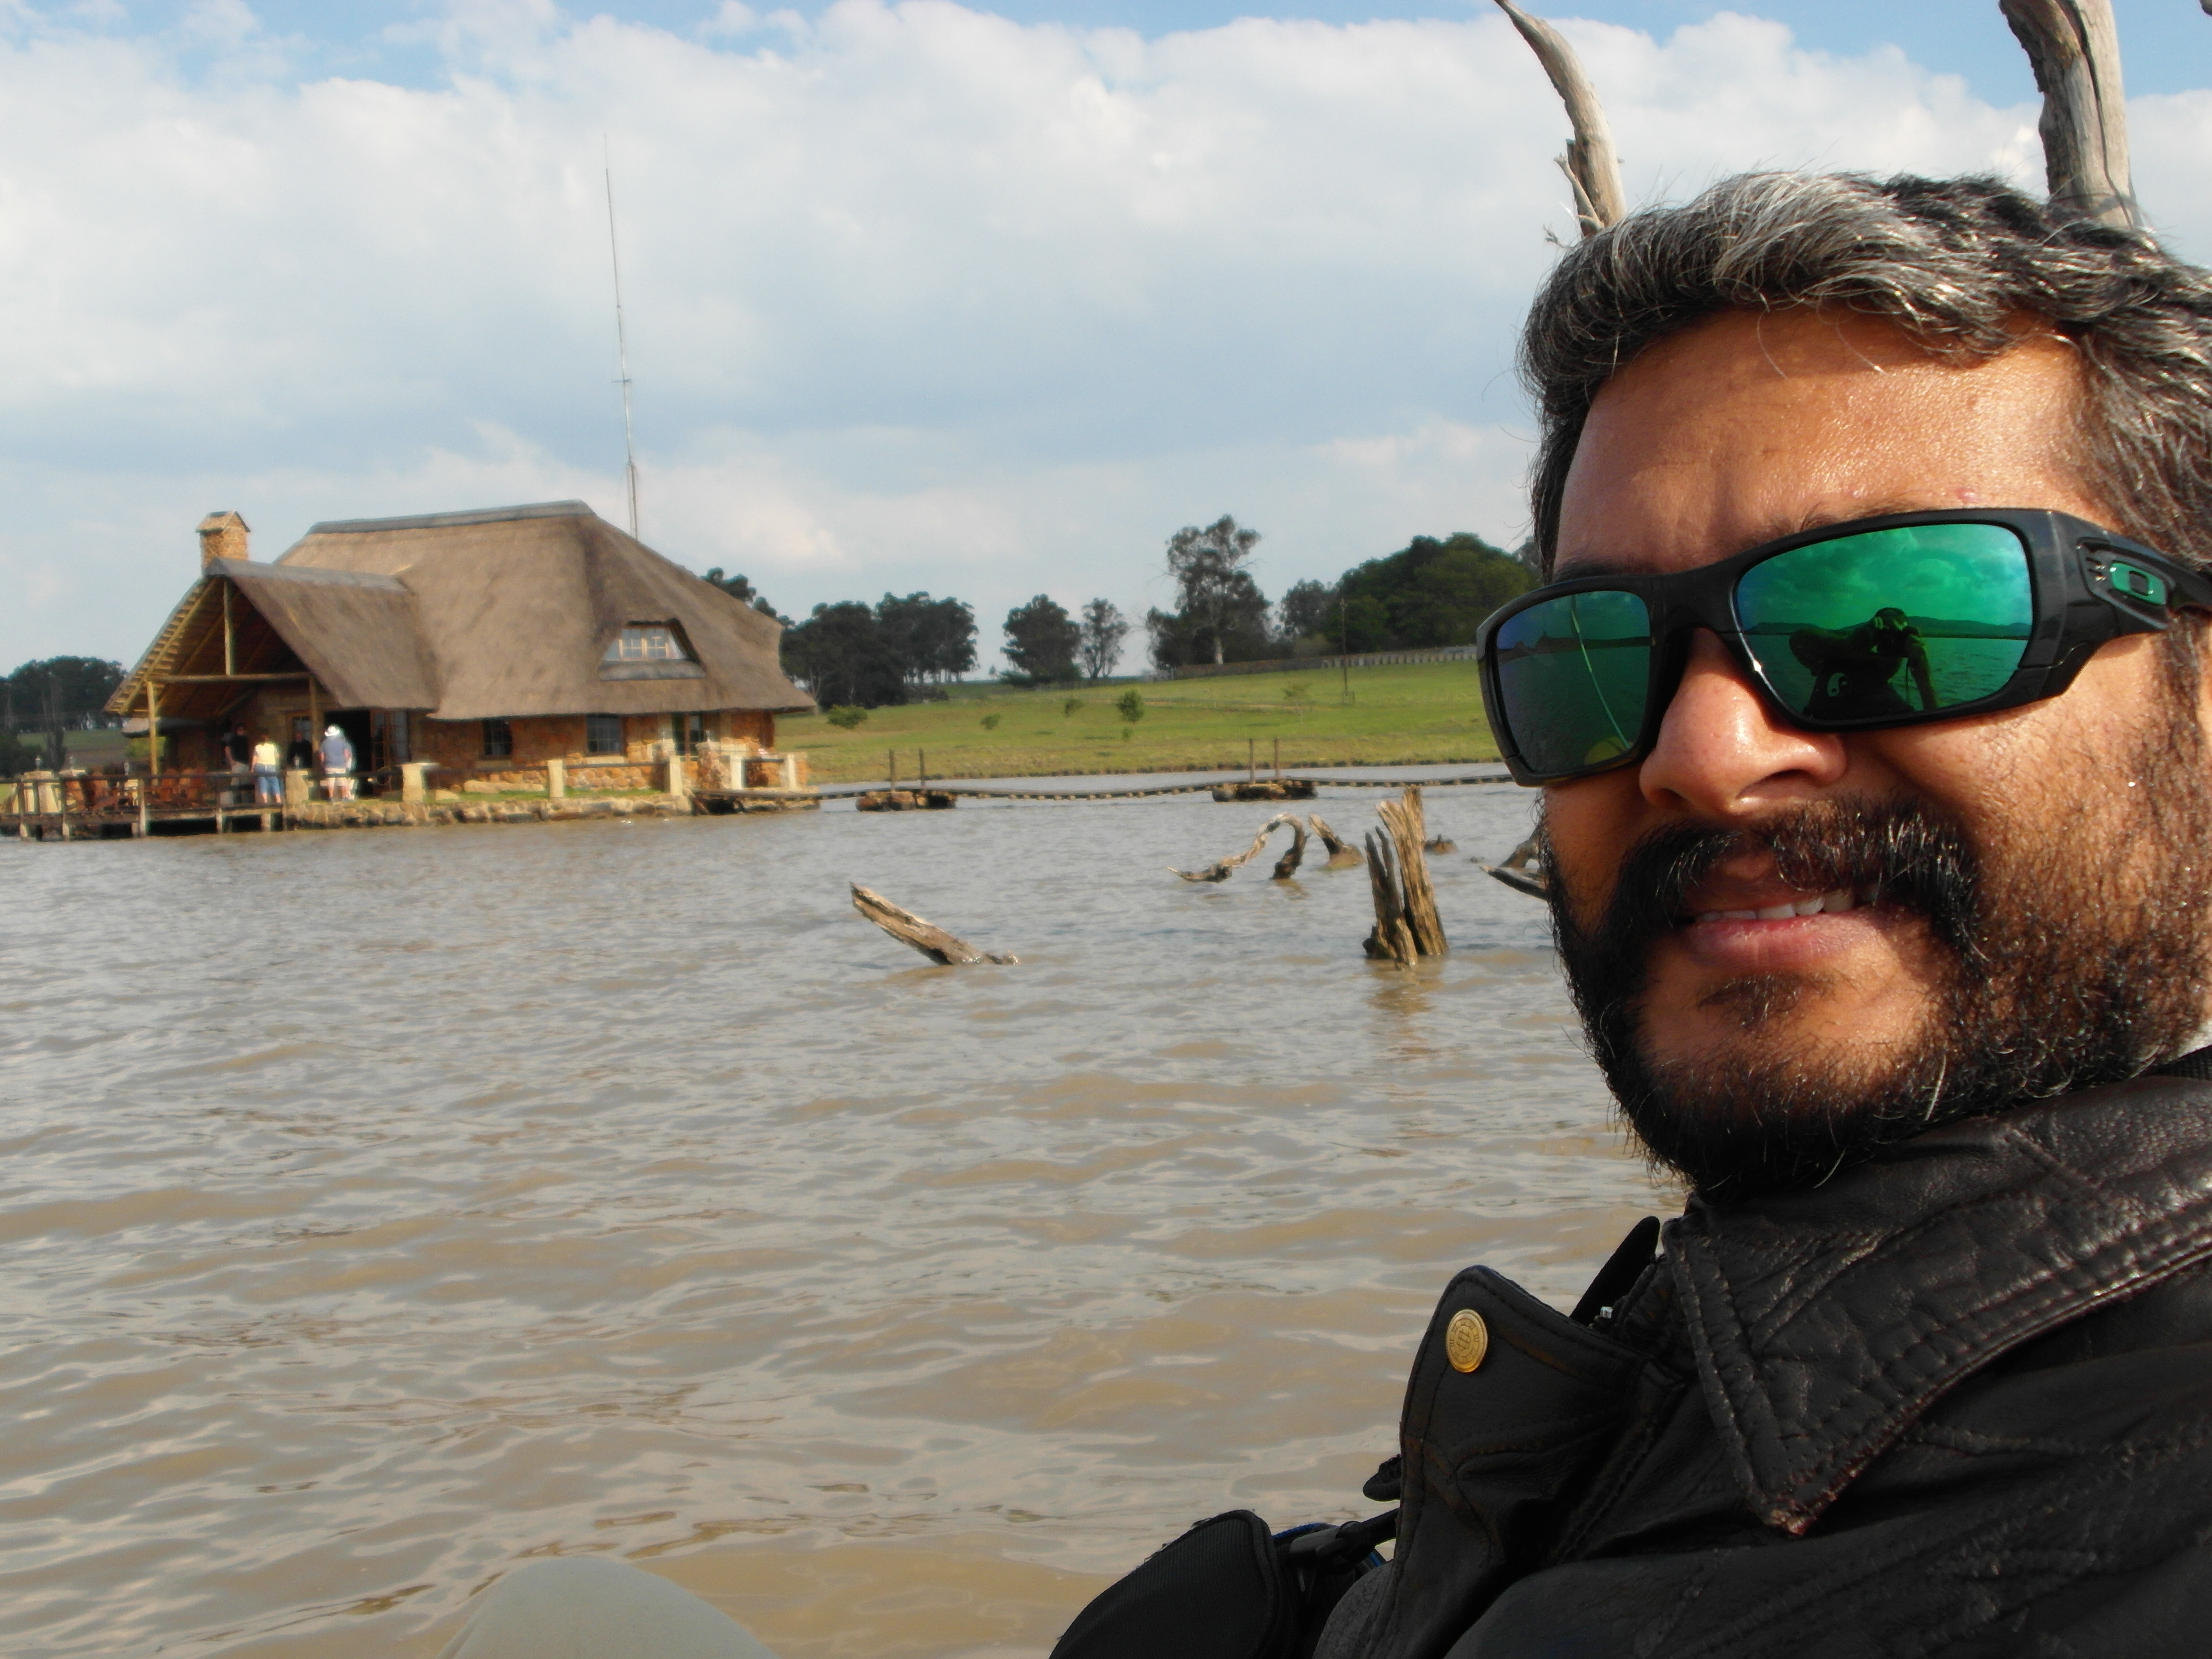 On the day of shoot at Memel, Free State. A nice boat ride looking at location from distance!